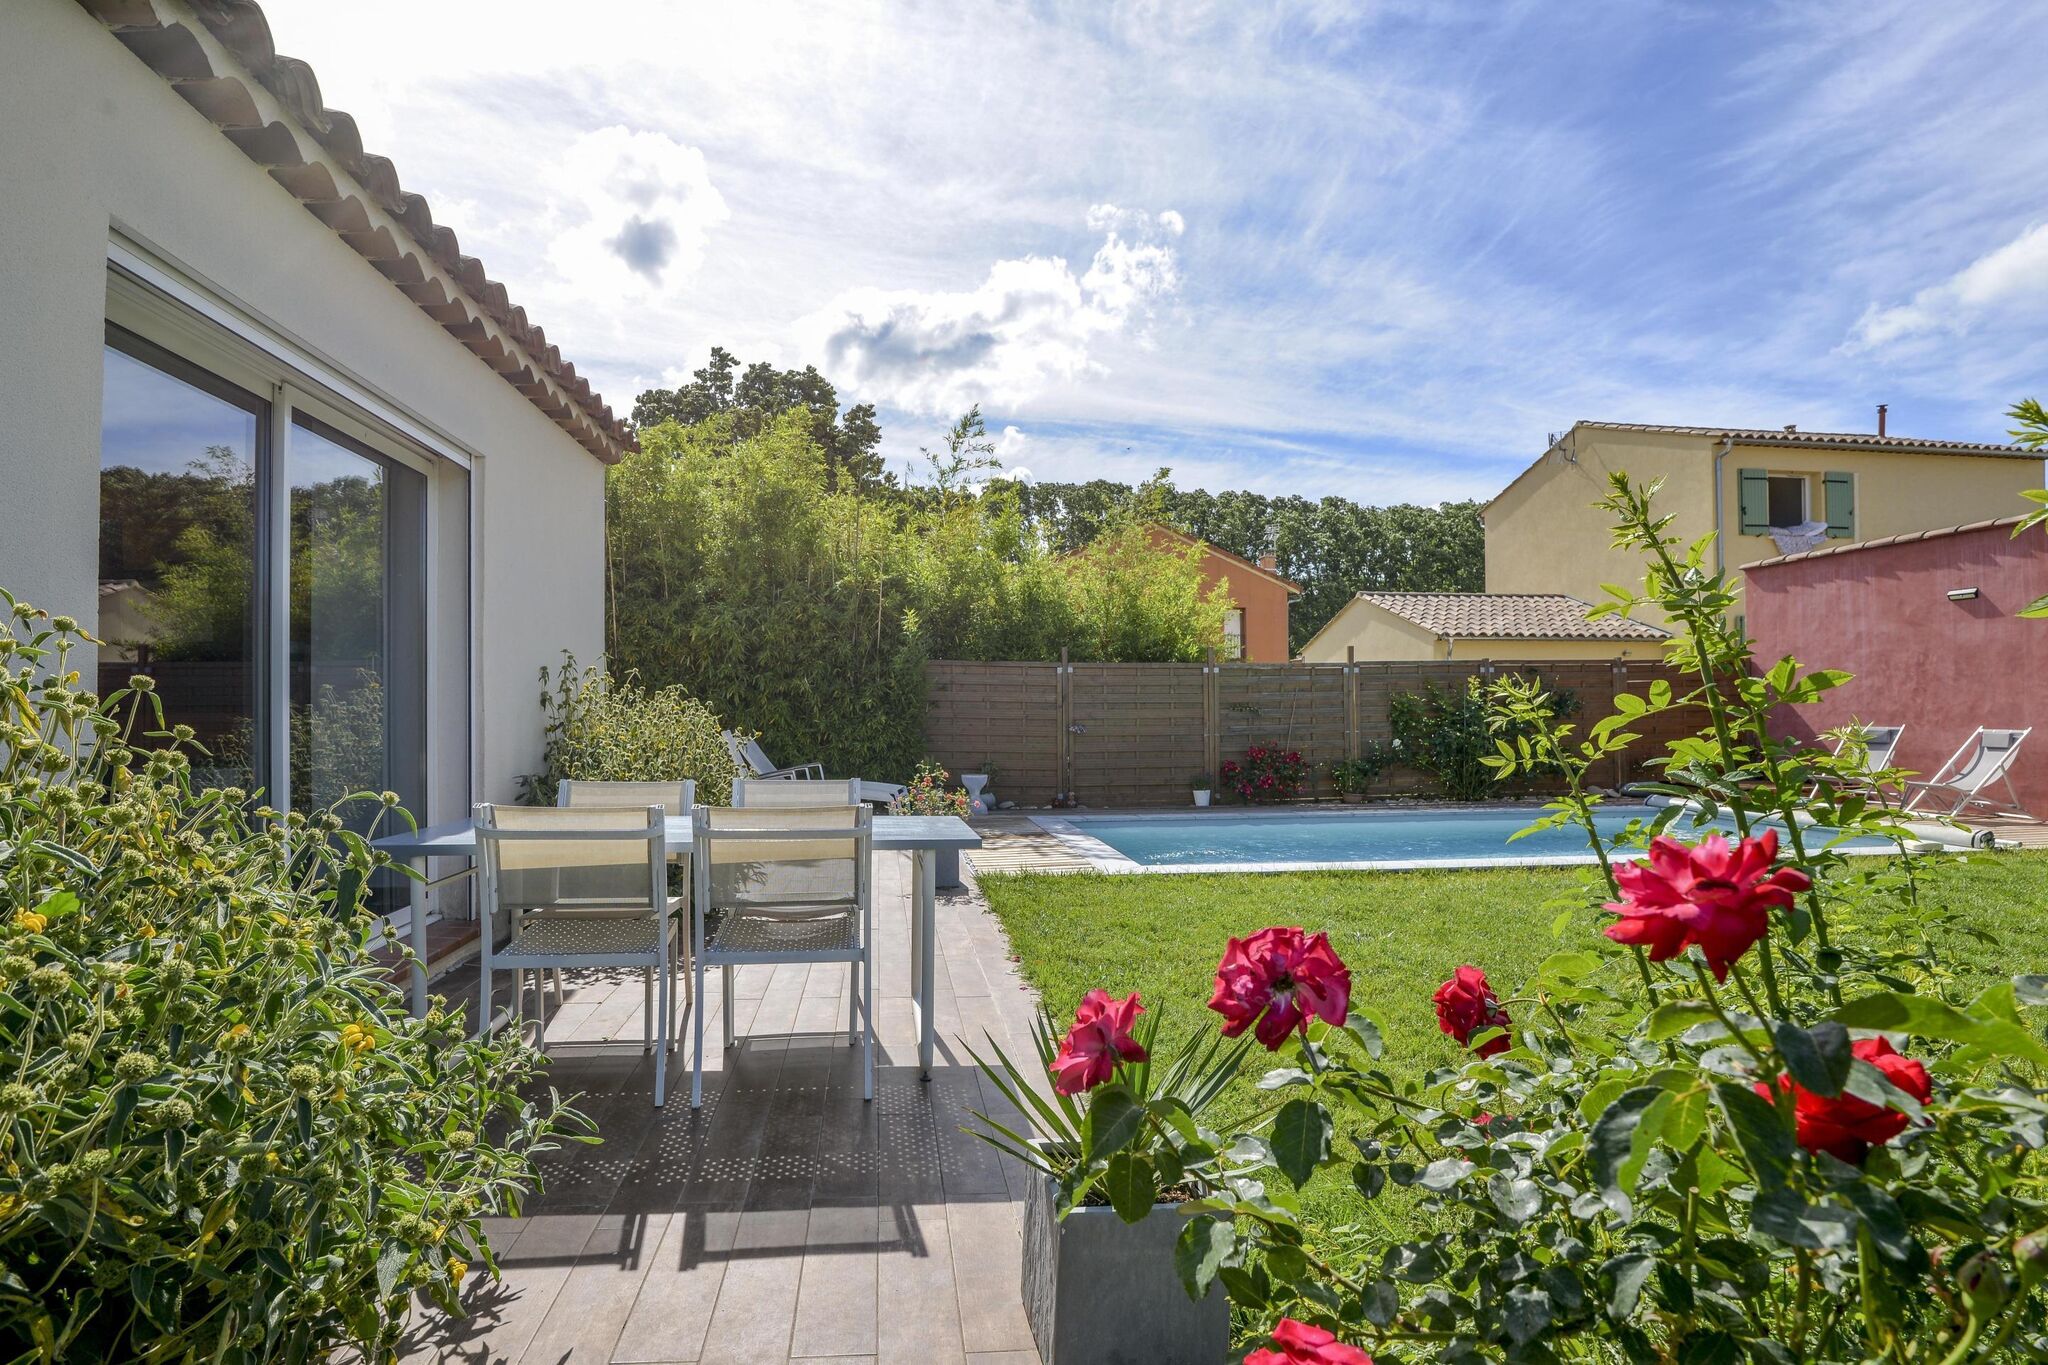 Beautiful studio in La Roque d'Anthéron with swimming pool